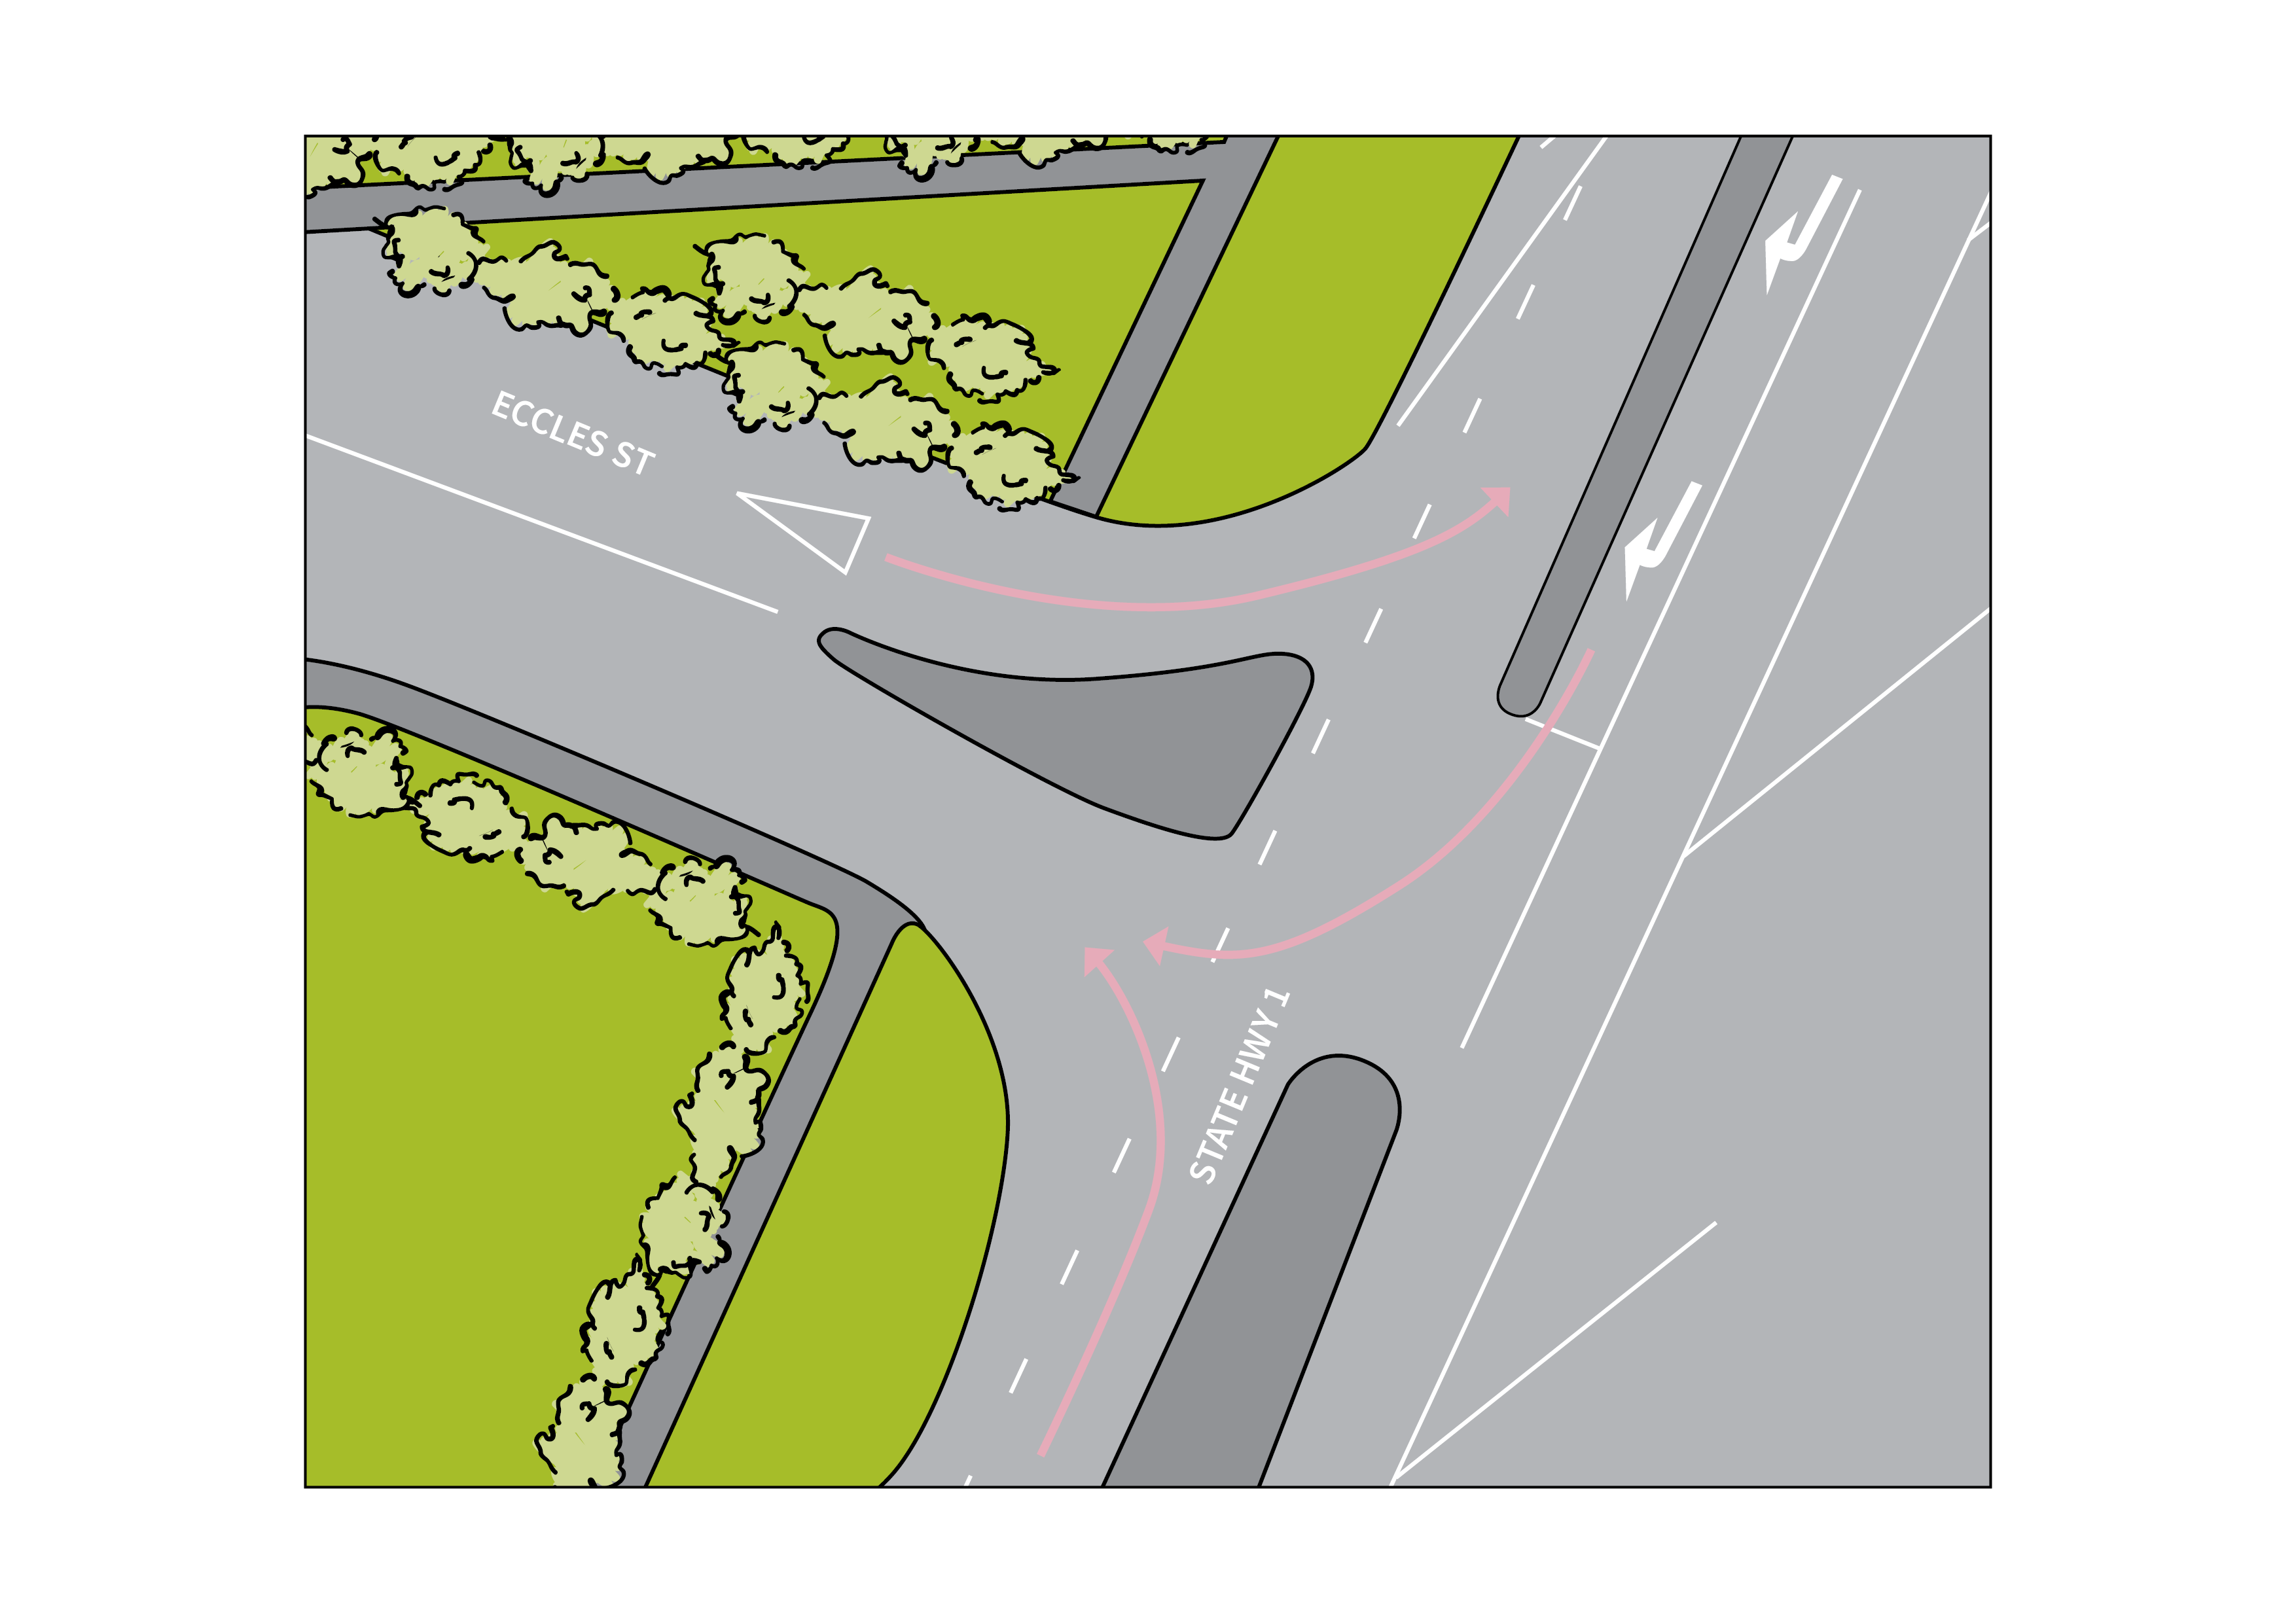 Proposed changes to the Eccles St-SH1 intersection